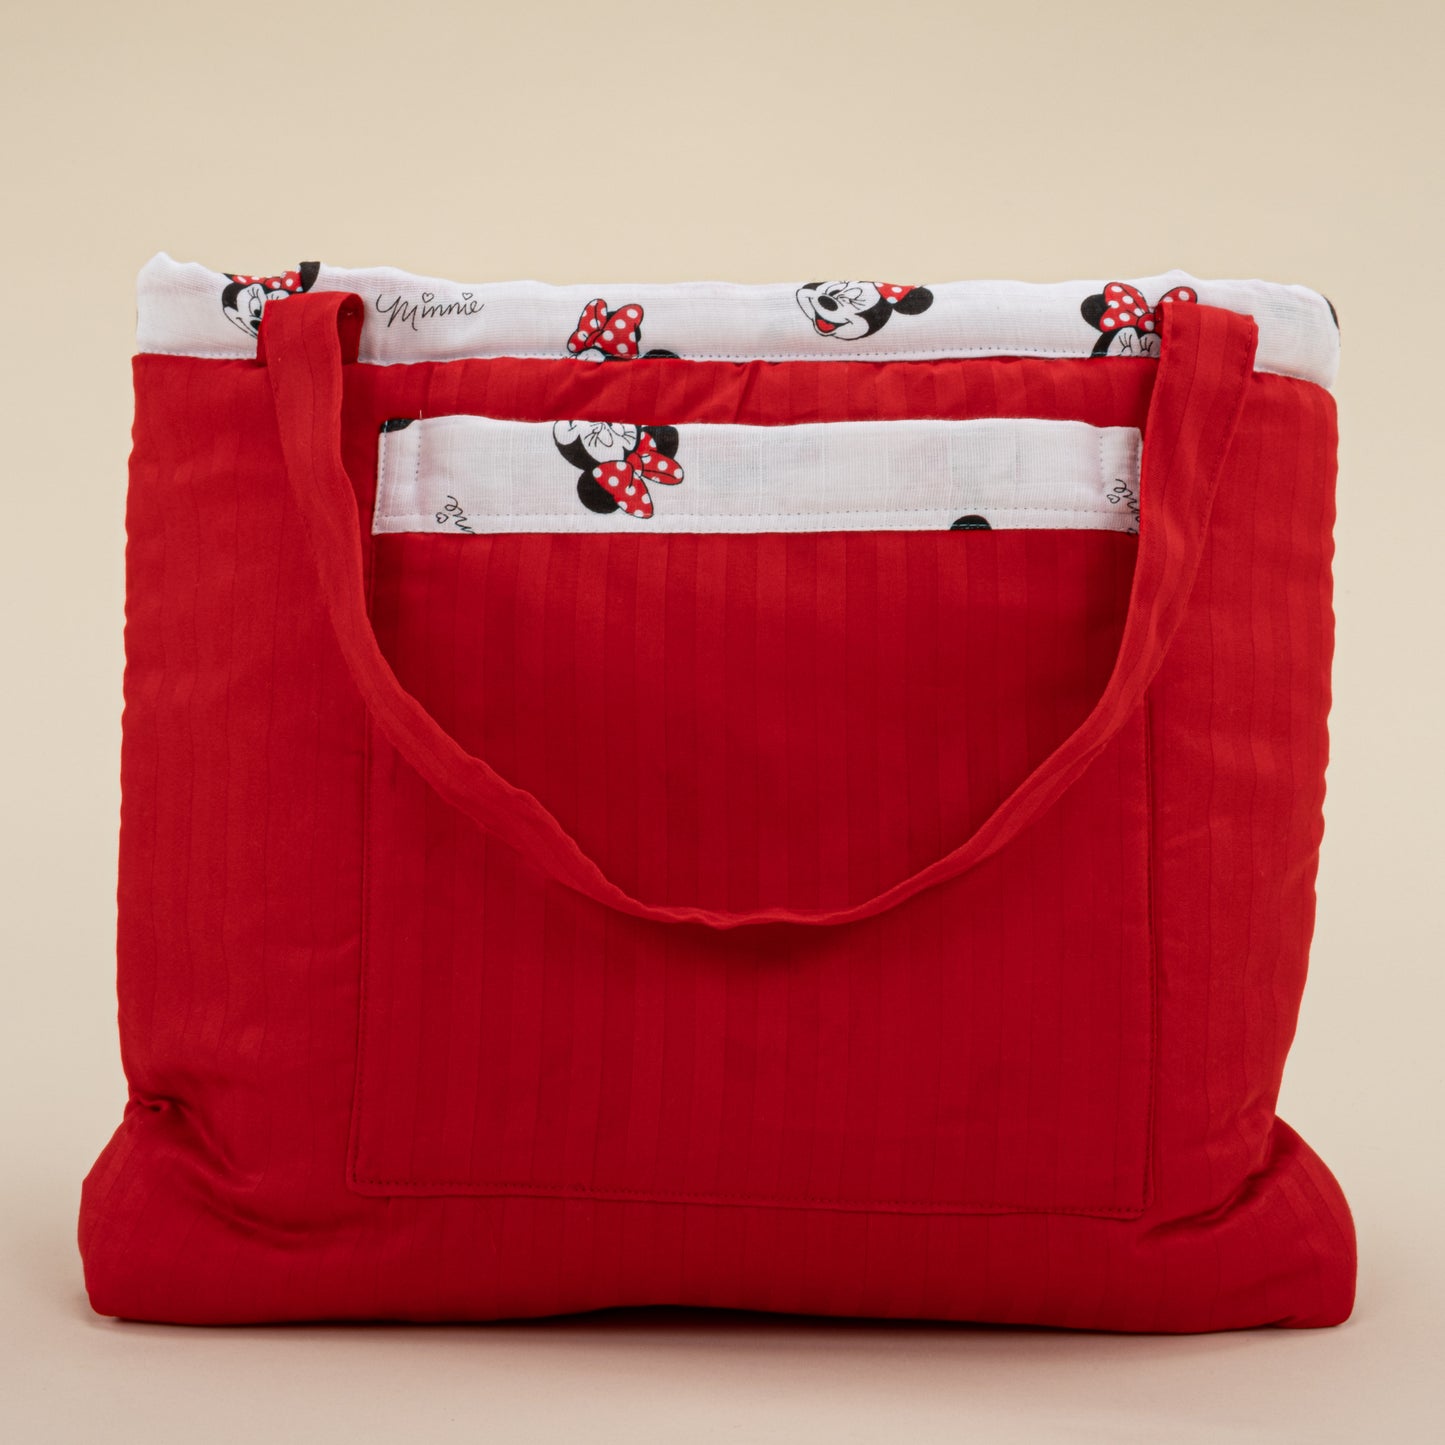 Baby Care Bag - Red Satin - Minnie